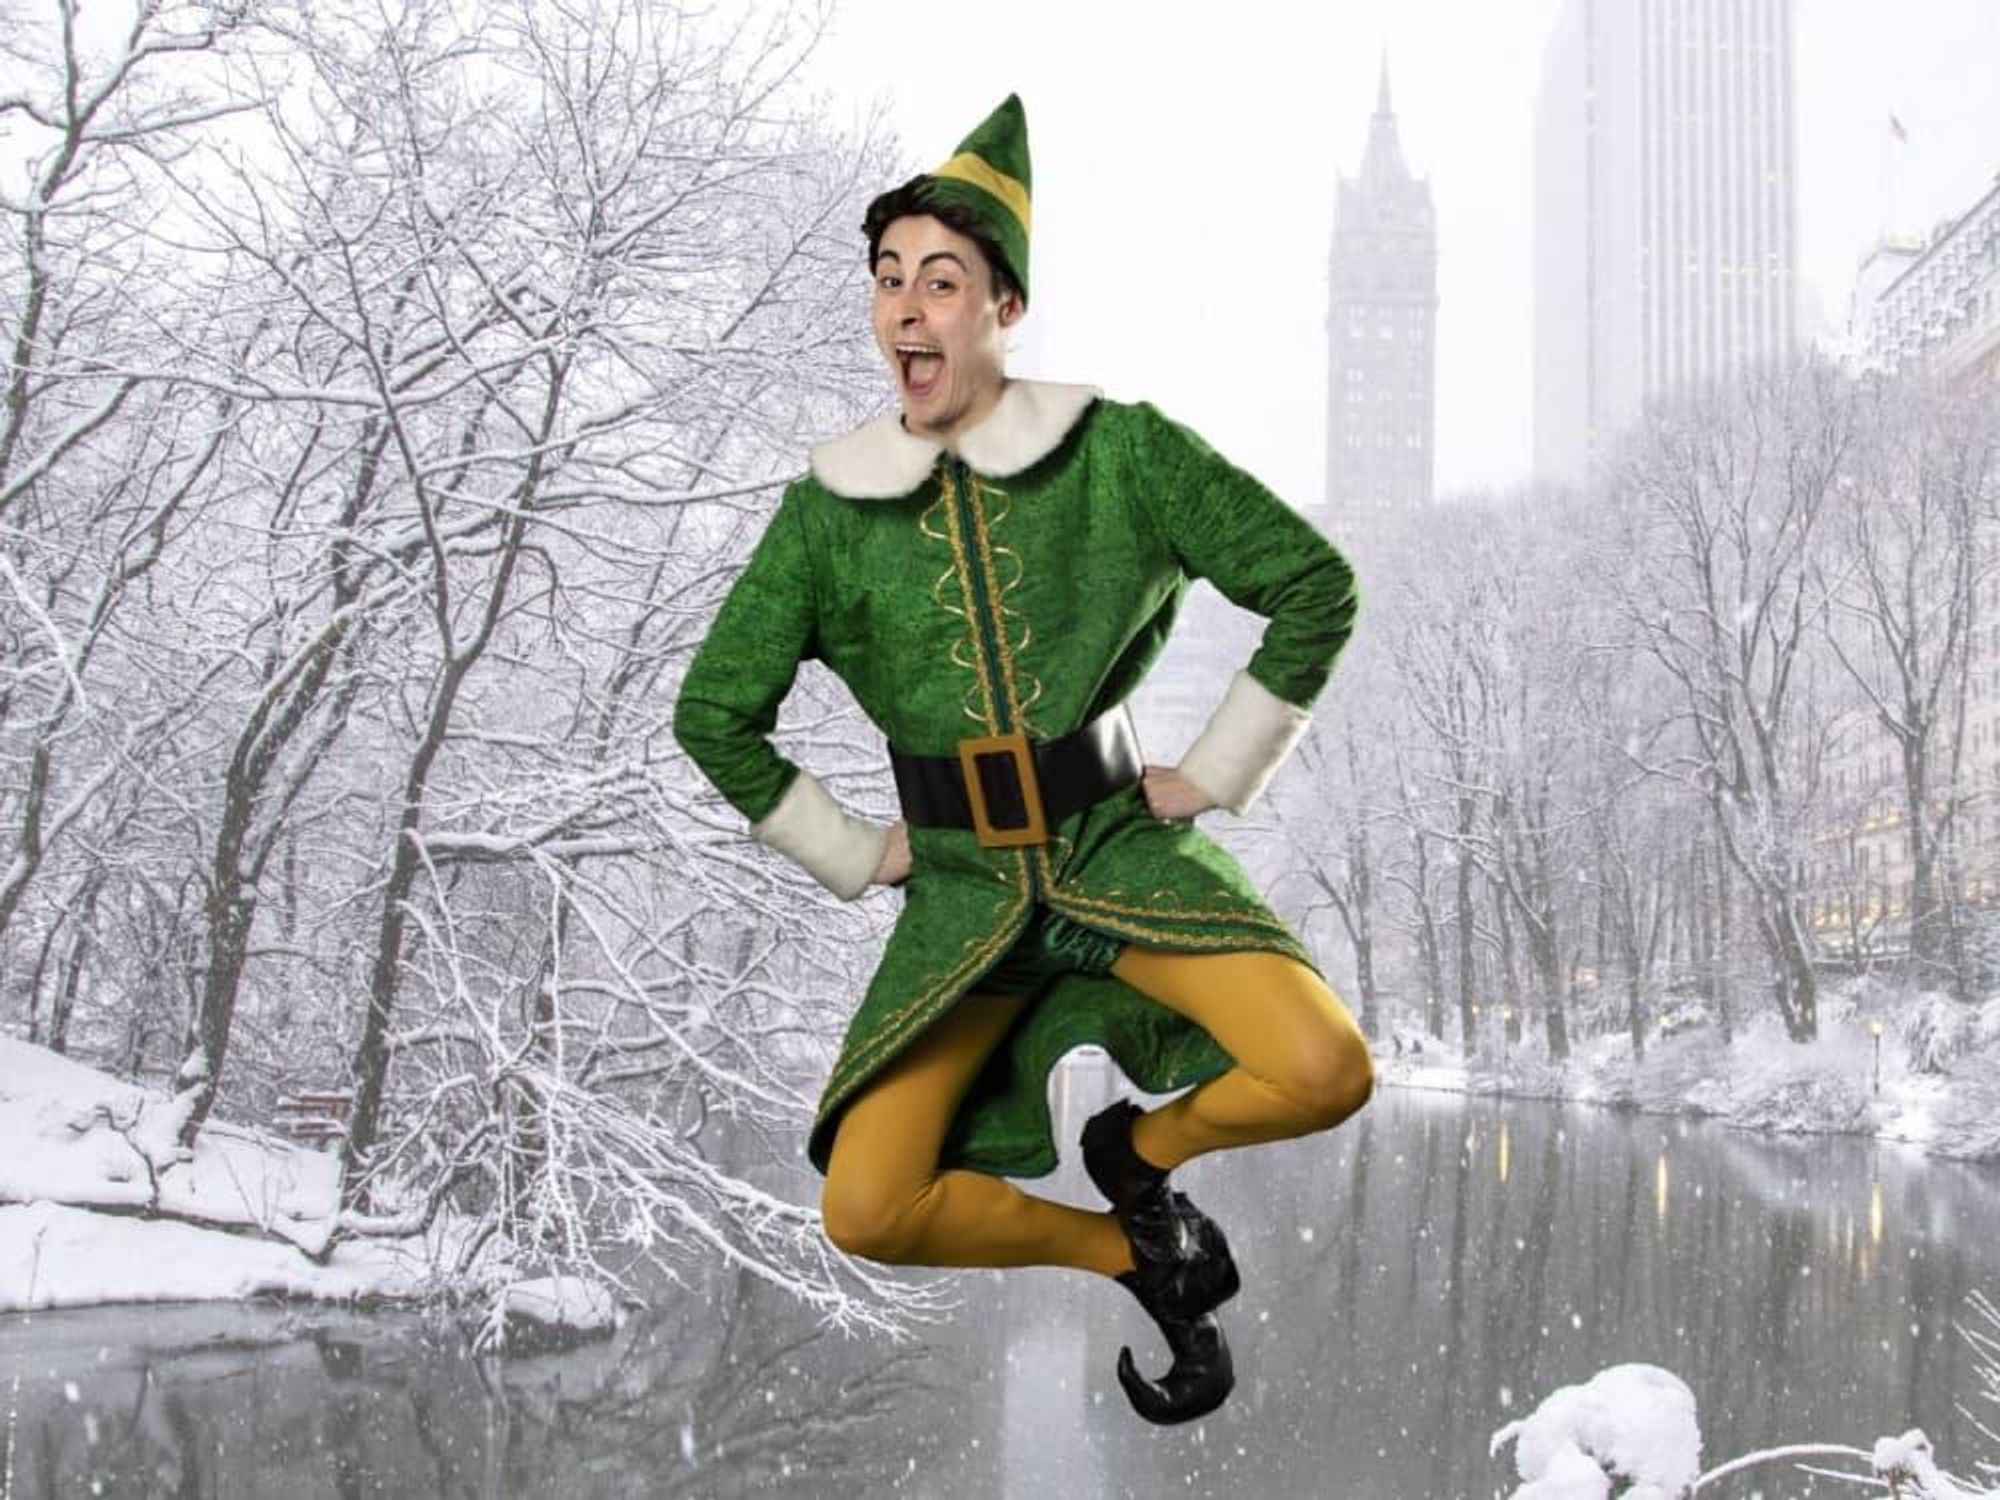 The Firehouse Theatre presents Elf the Musical